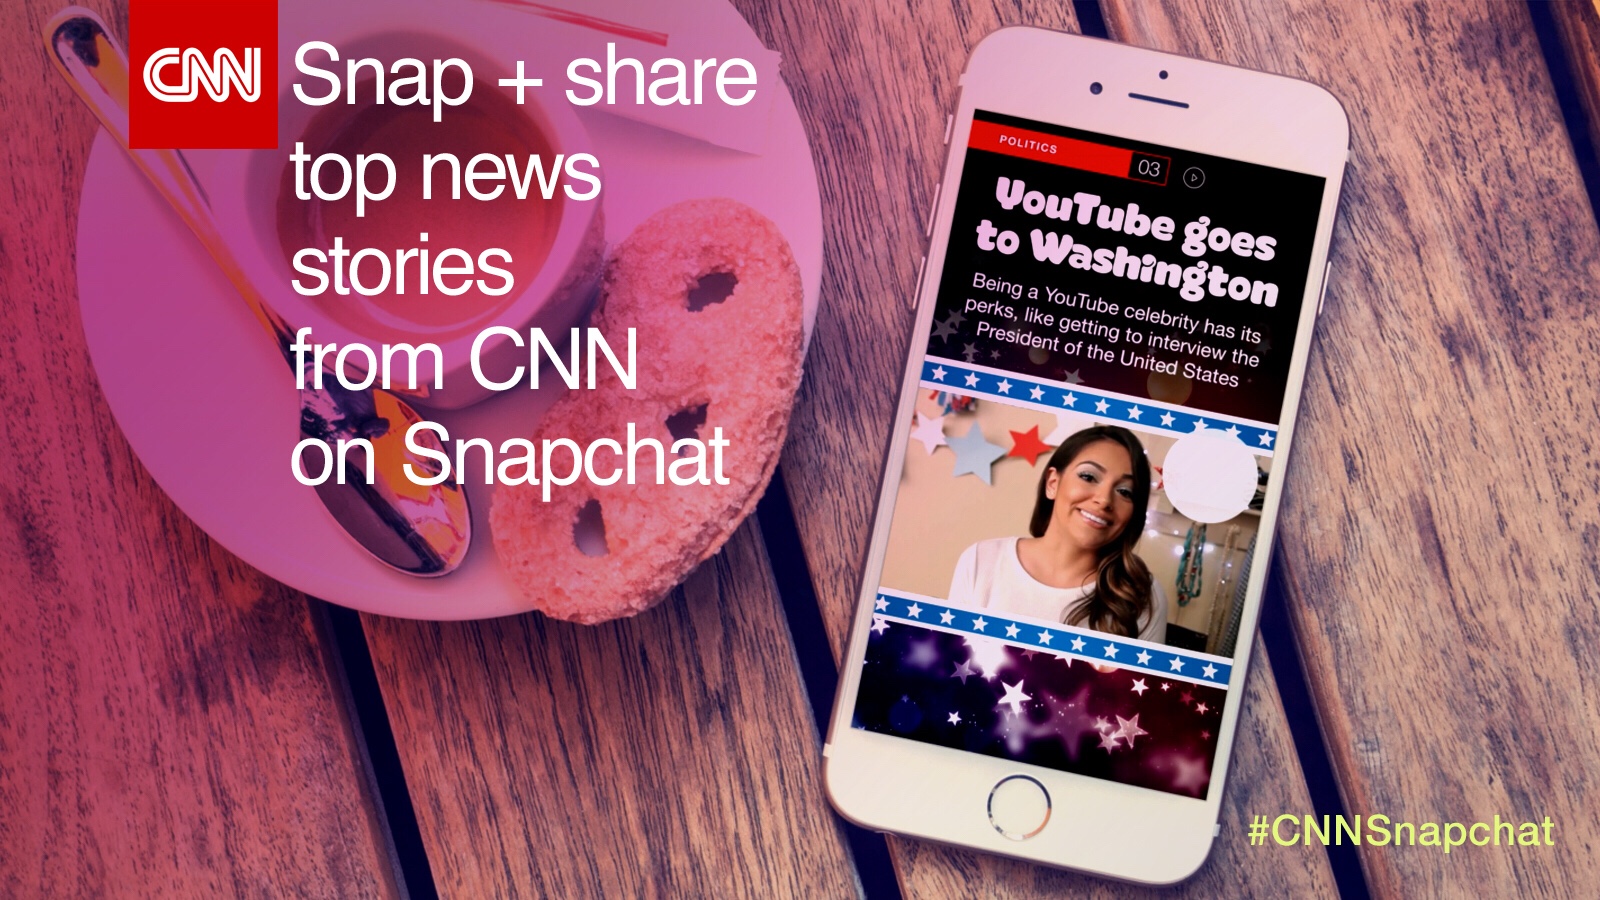 CNN decides to end its made-for-Snapchat daily show